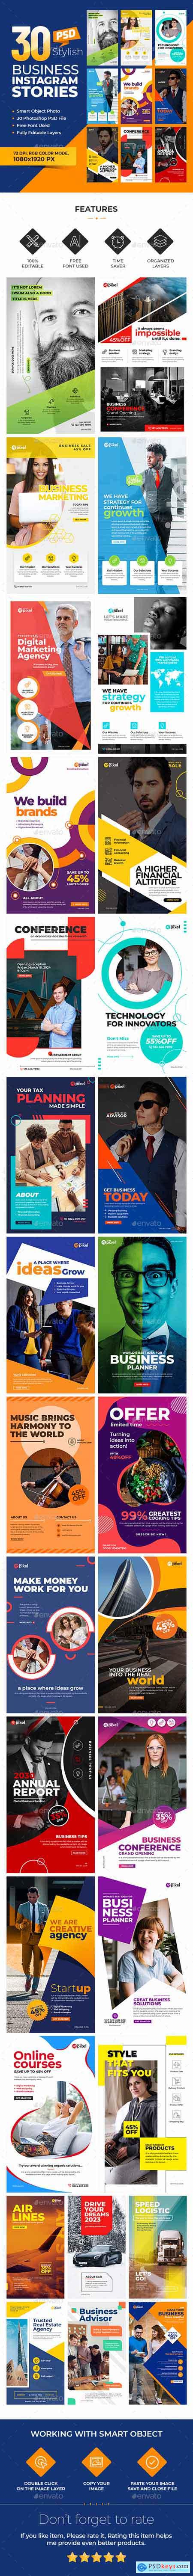 Instagram Business Stories Banners 27715116